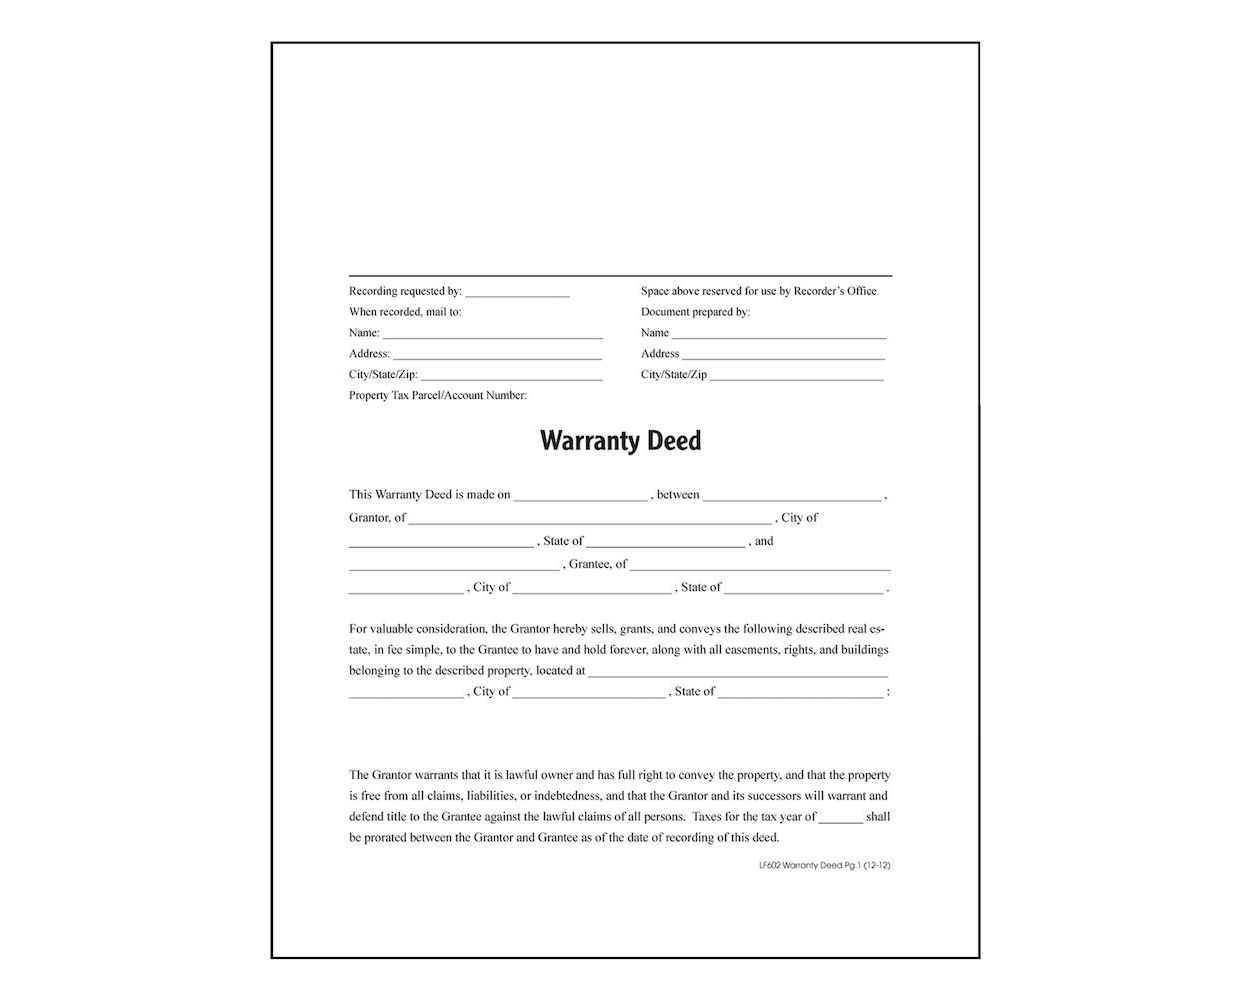 adams-warranty-deed-forms-and-instructions